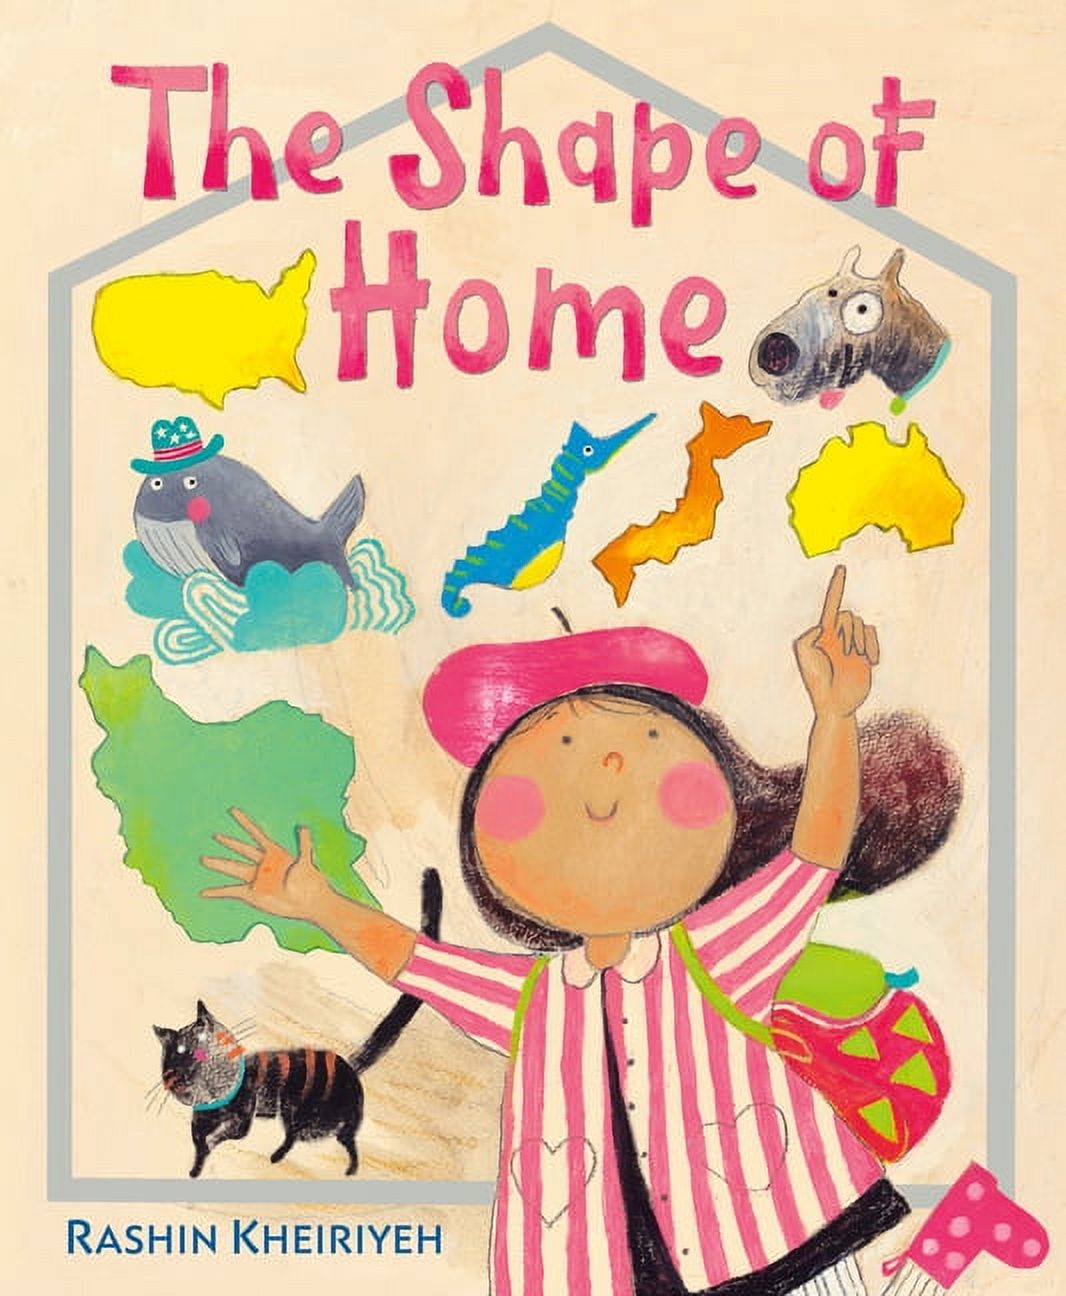 The Shape of Home (Hardcover) - image 1 of 1